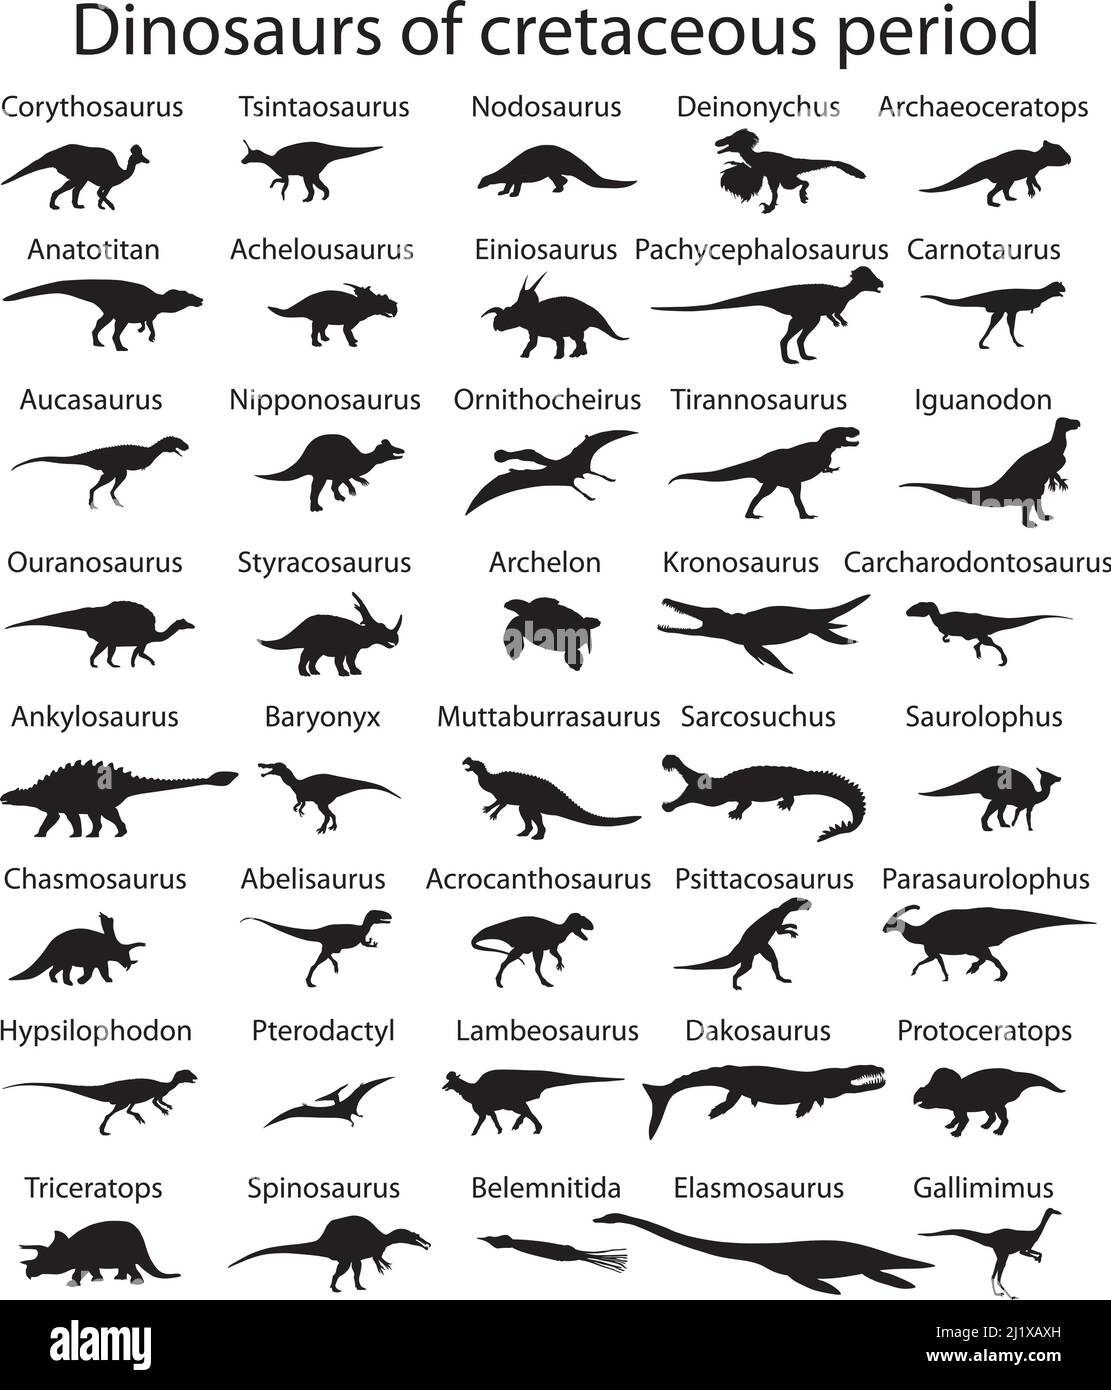 Silhouettes of dinosaurs of cretaceous period of mesozoic era with names Stock Vector